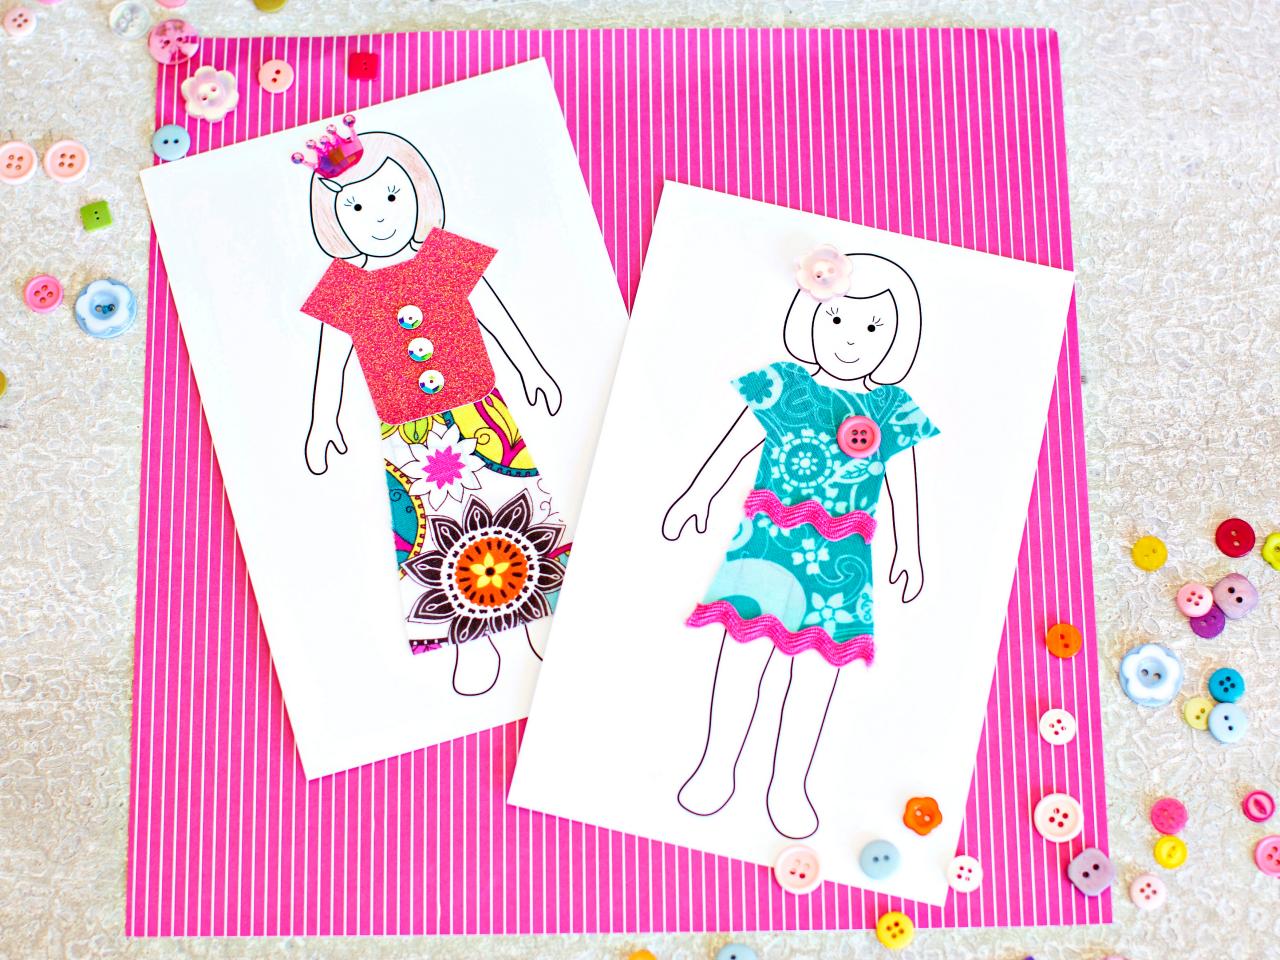 How To Make Paper Dolls With Downloadable Patterns How Tos - 